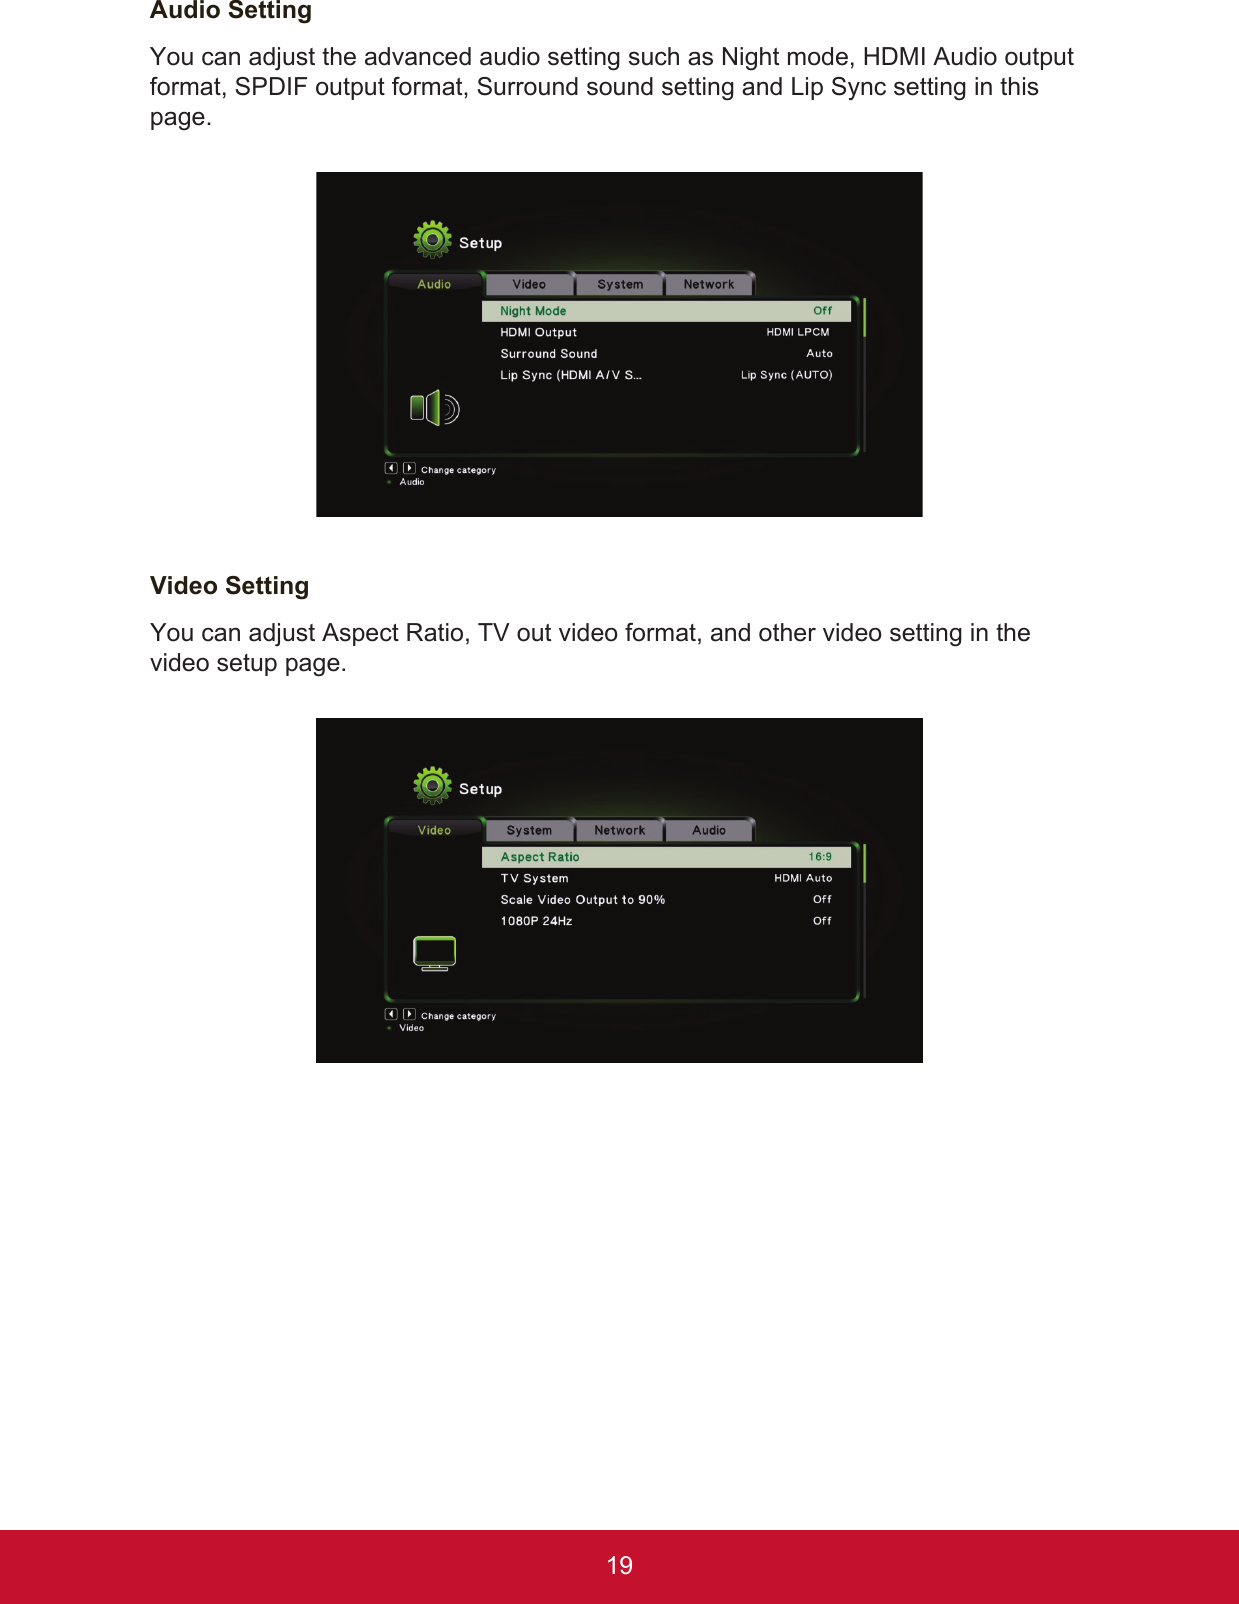 19Audio SettingYou can adjust the advanced audio setting such as Night mode, HDMI Audio output format, SPDIF output format, Surround sound setting and Lip Sync setting in this page.Video SettingYou can adjust Aspect Ratio, TV out video format, and other video setting in the video setup page.